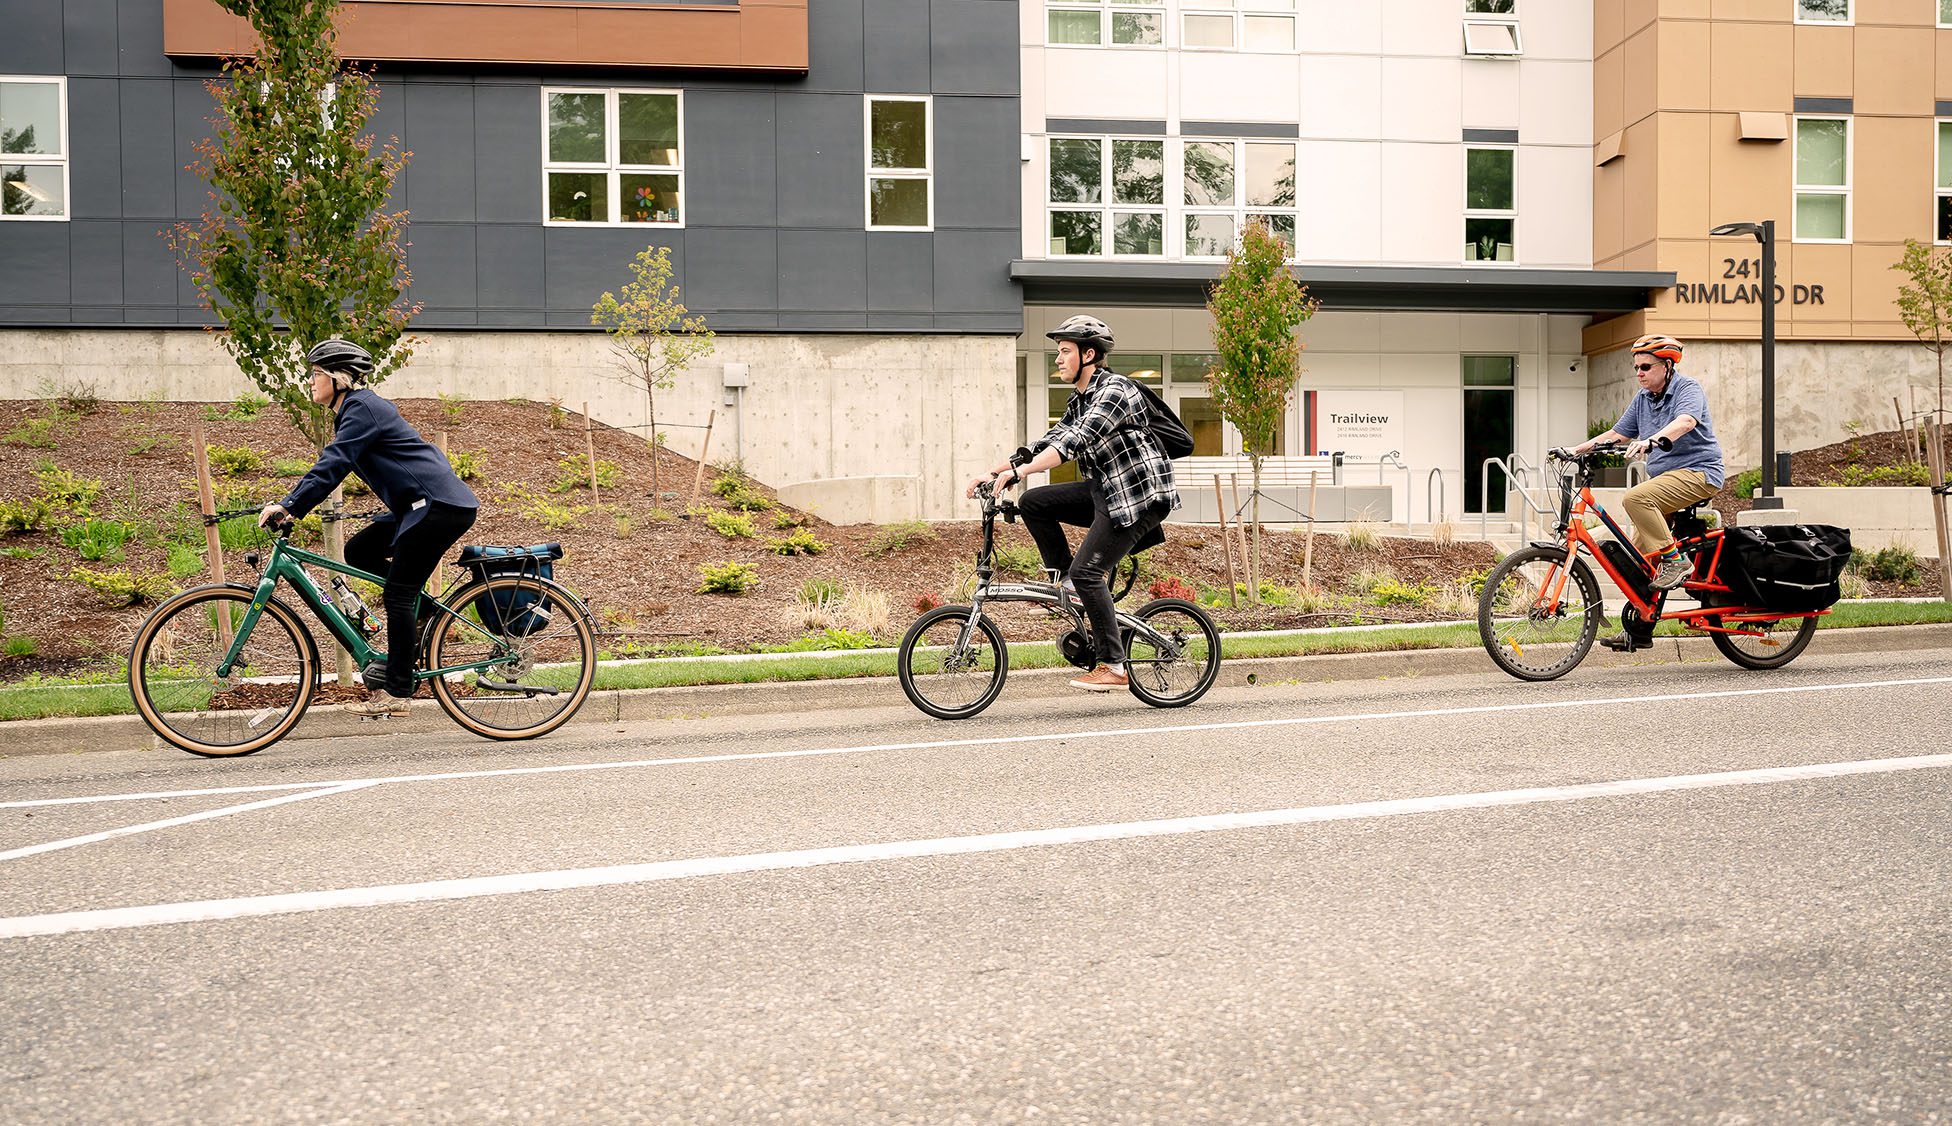 Three people biking in a row in a bike lane on a road in front of a building.